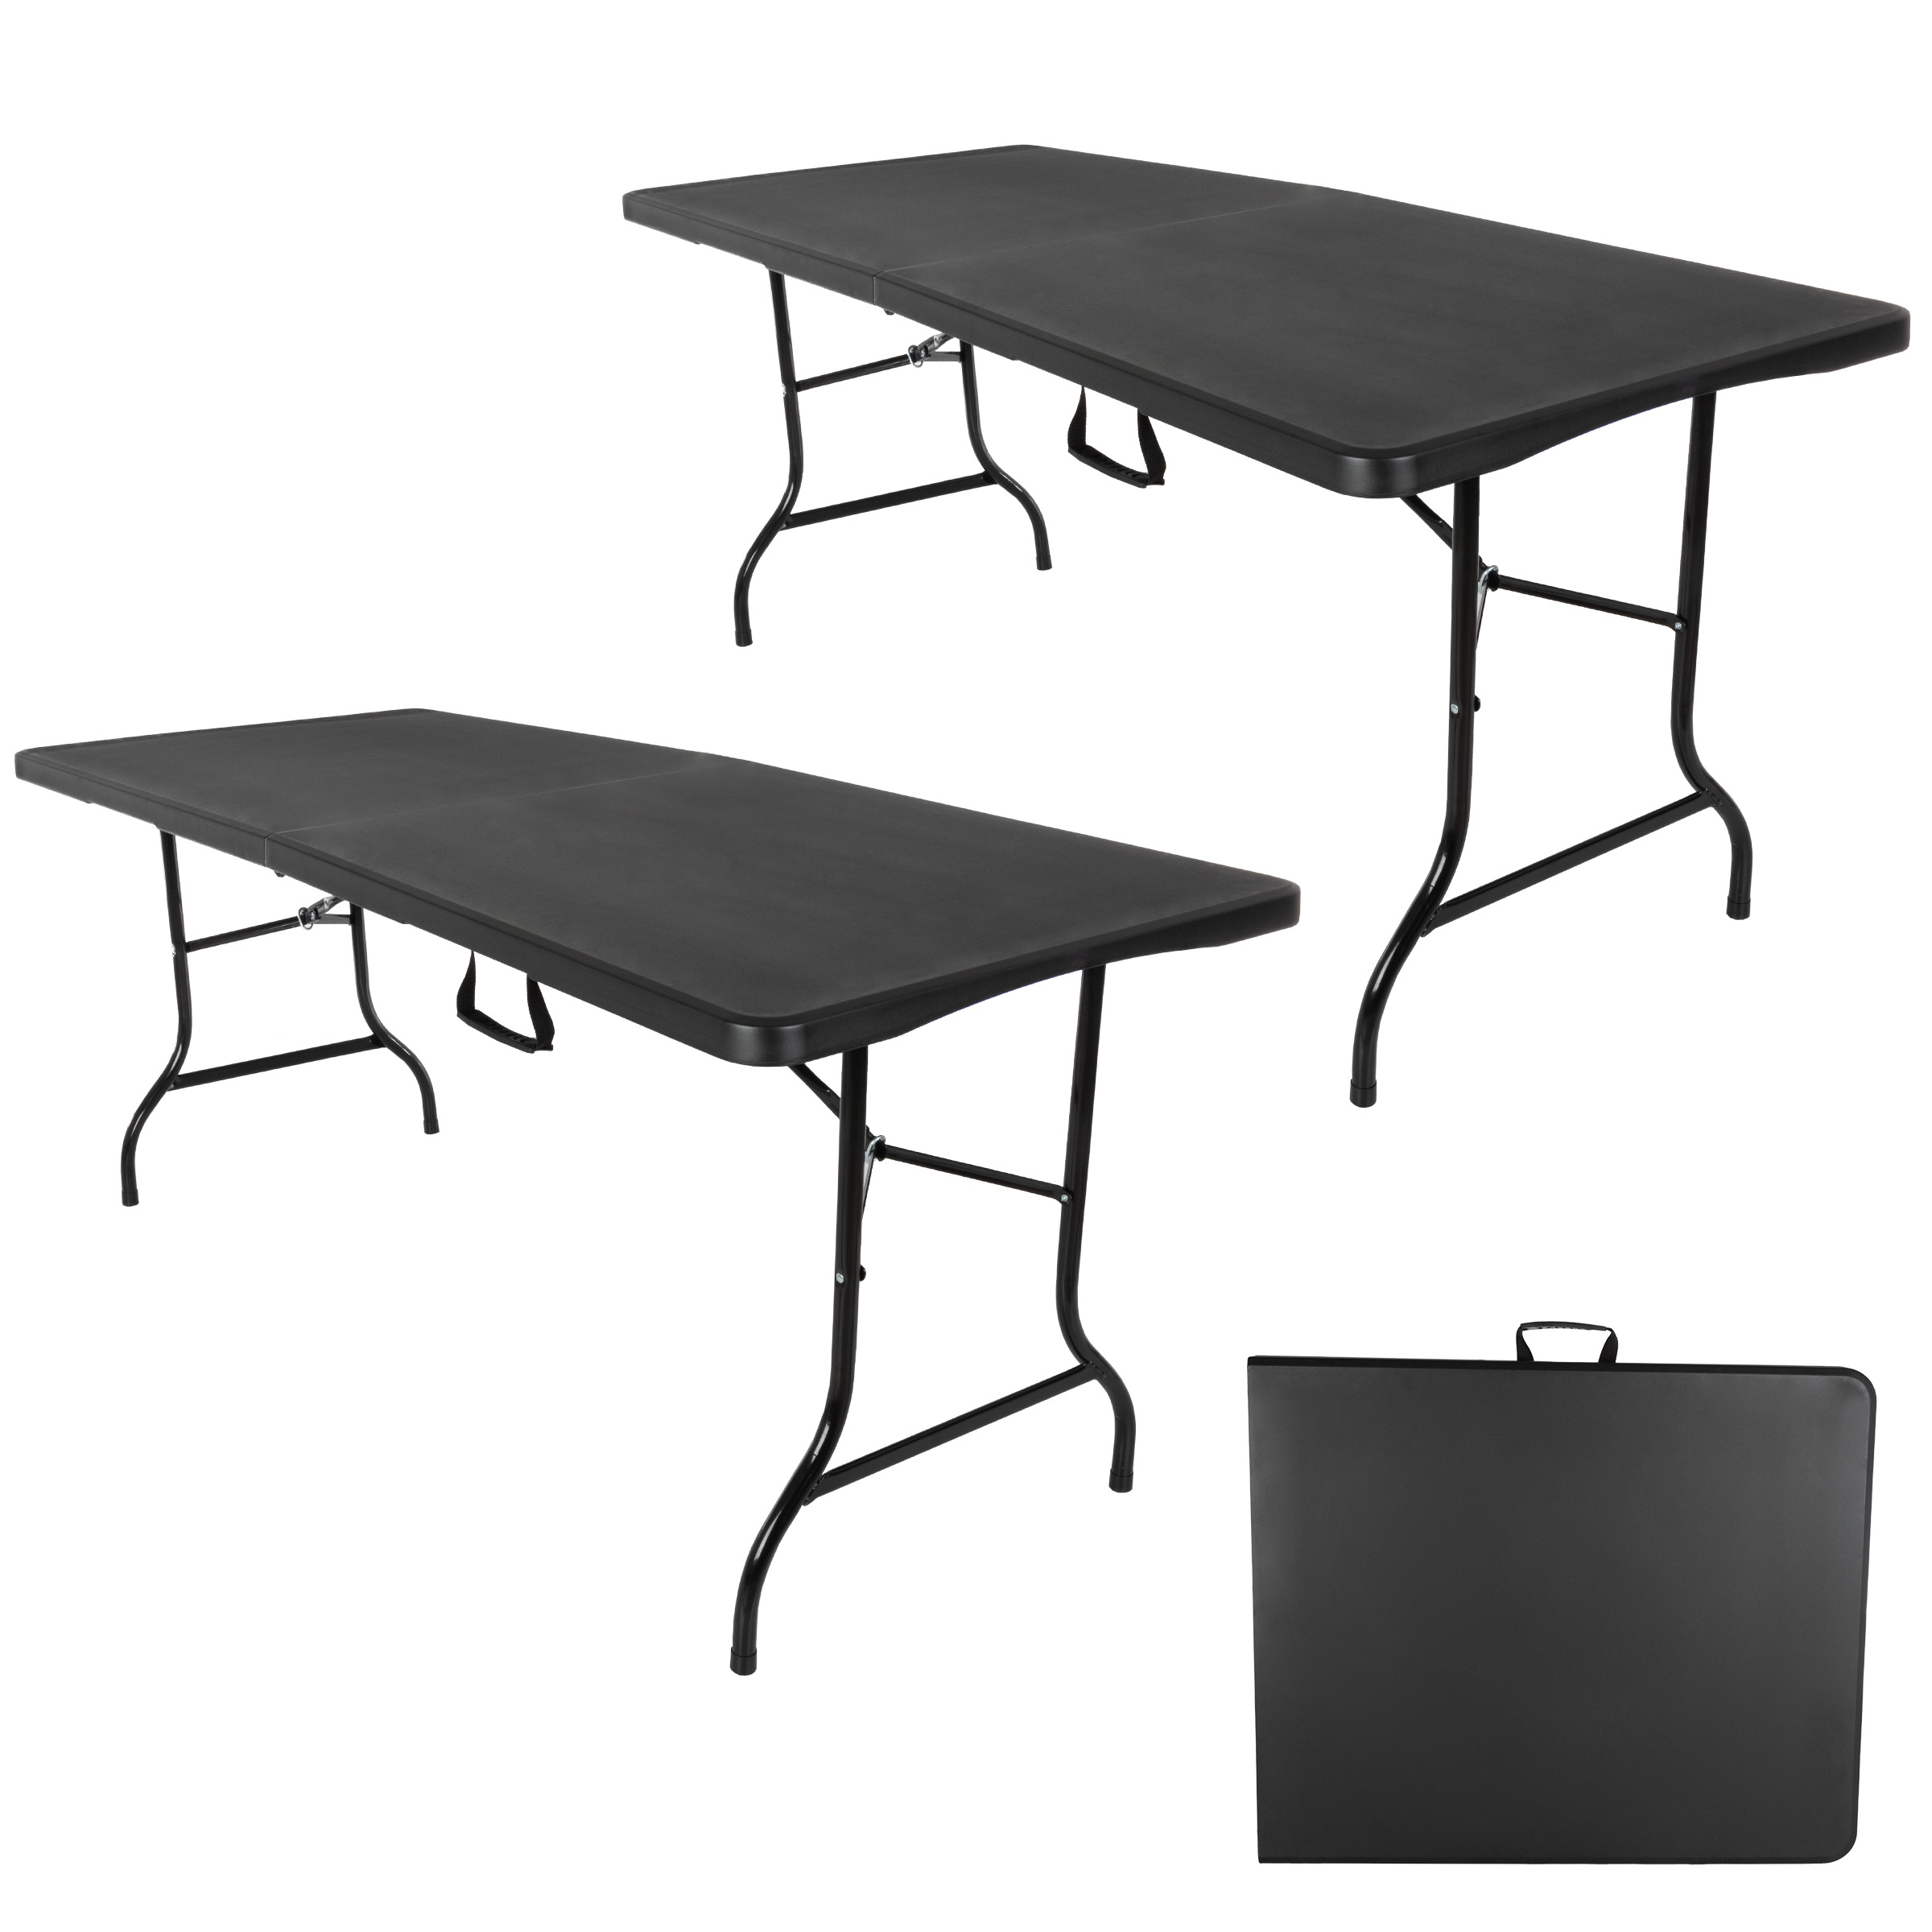 Folding Table Set - Set Of 2 Lightweight Portable Tables - 6-Foot-Long Plastic Tabletops For Camping, Parties, And Dining By Everyday Home (